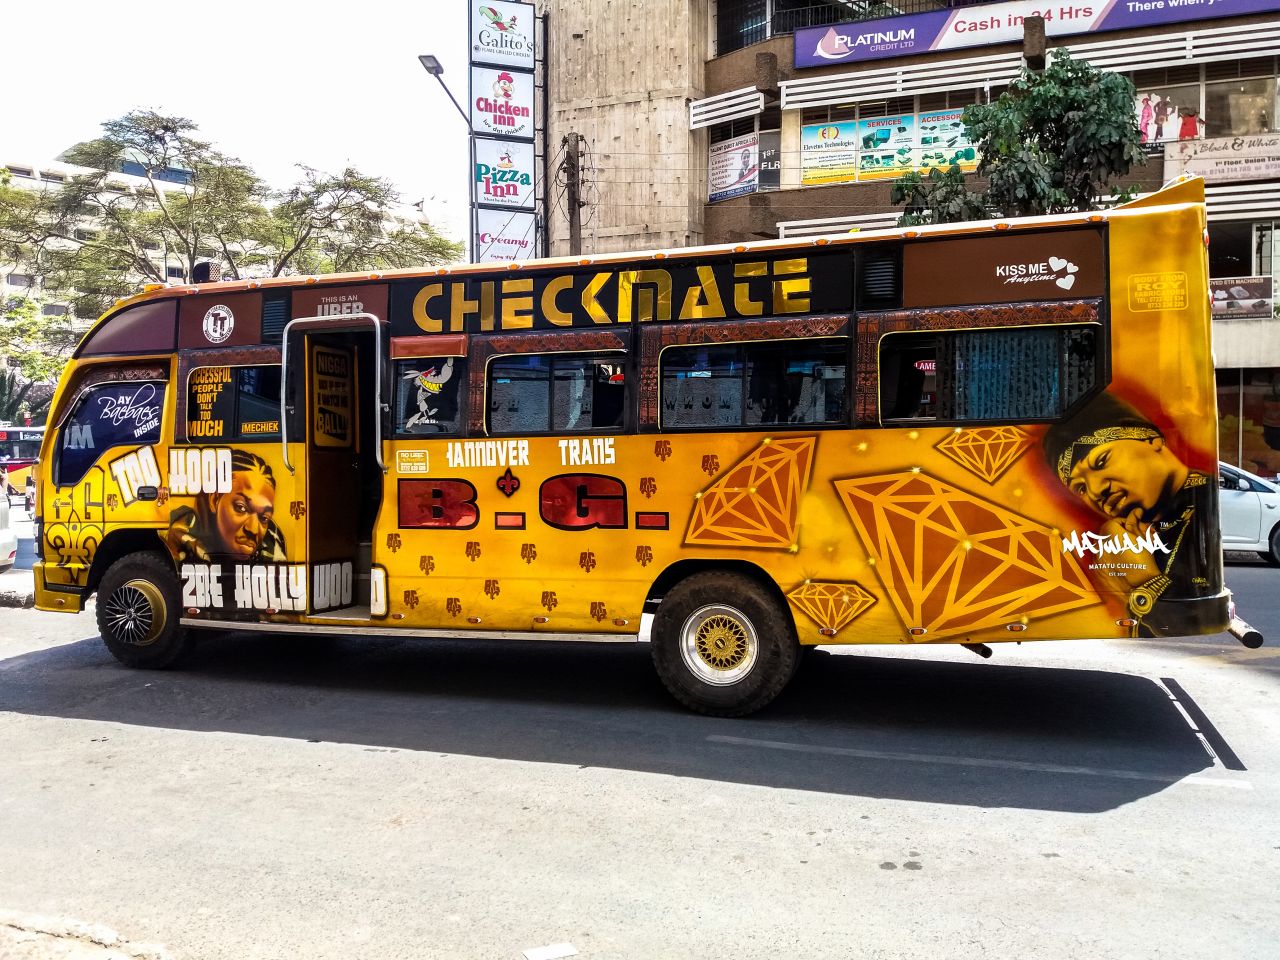 Some consider matatu rides to be loud, reckless and chaotic with 30-odd people crammed inside.